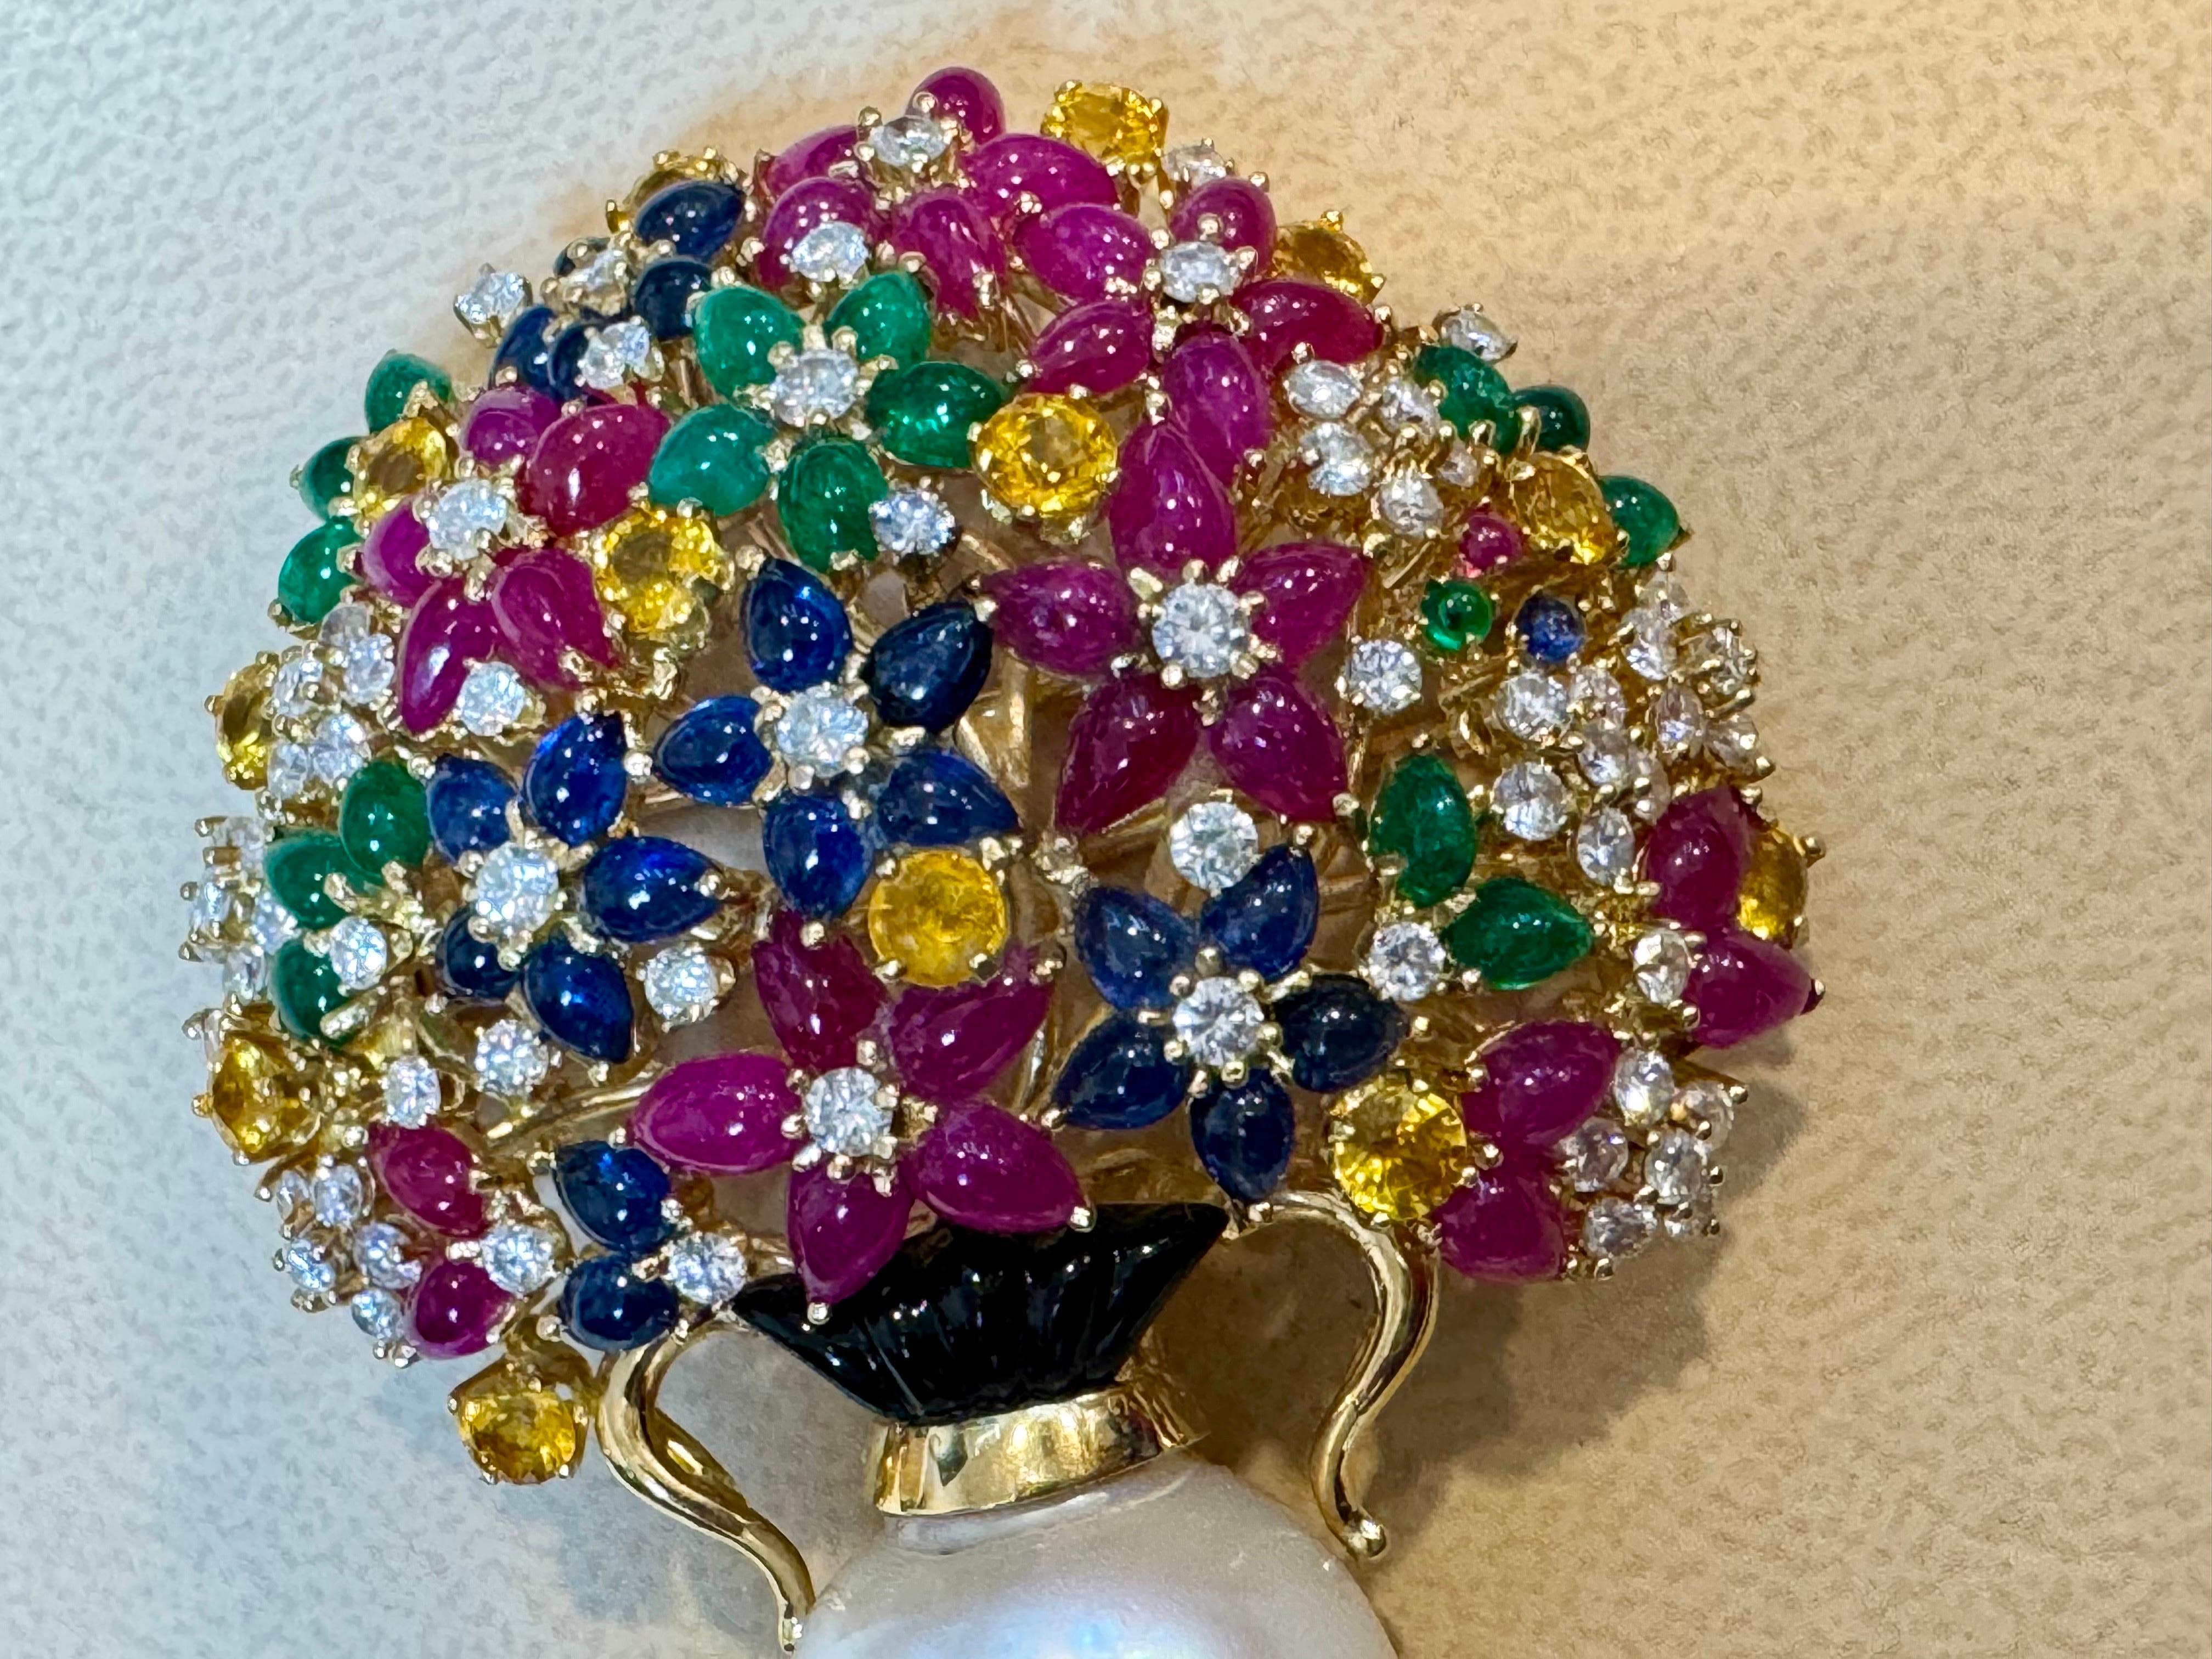 Estate Ruby Sapphire Emerald Diamond & Pearl 18 K Gold Flower Basket Brooch/ pin
18k Yellow gold flower basket brooch, adorned with vivid sapphires Emeralds  and rubies, as well as 2.95 ctw in diamonds. Brooch measures 2.5